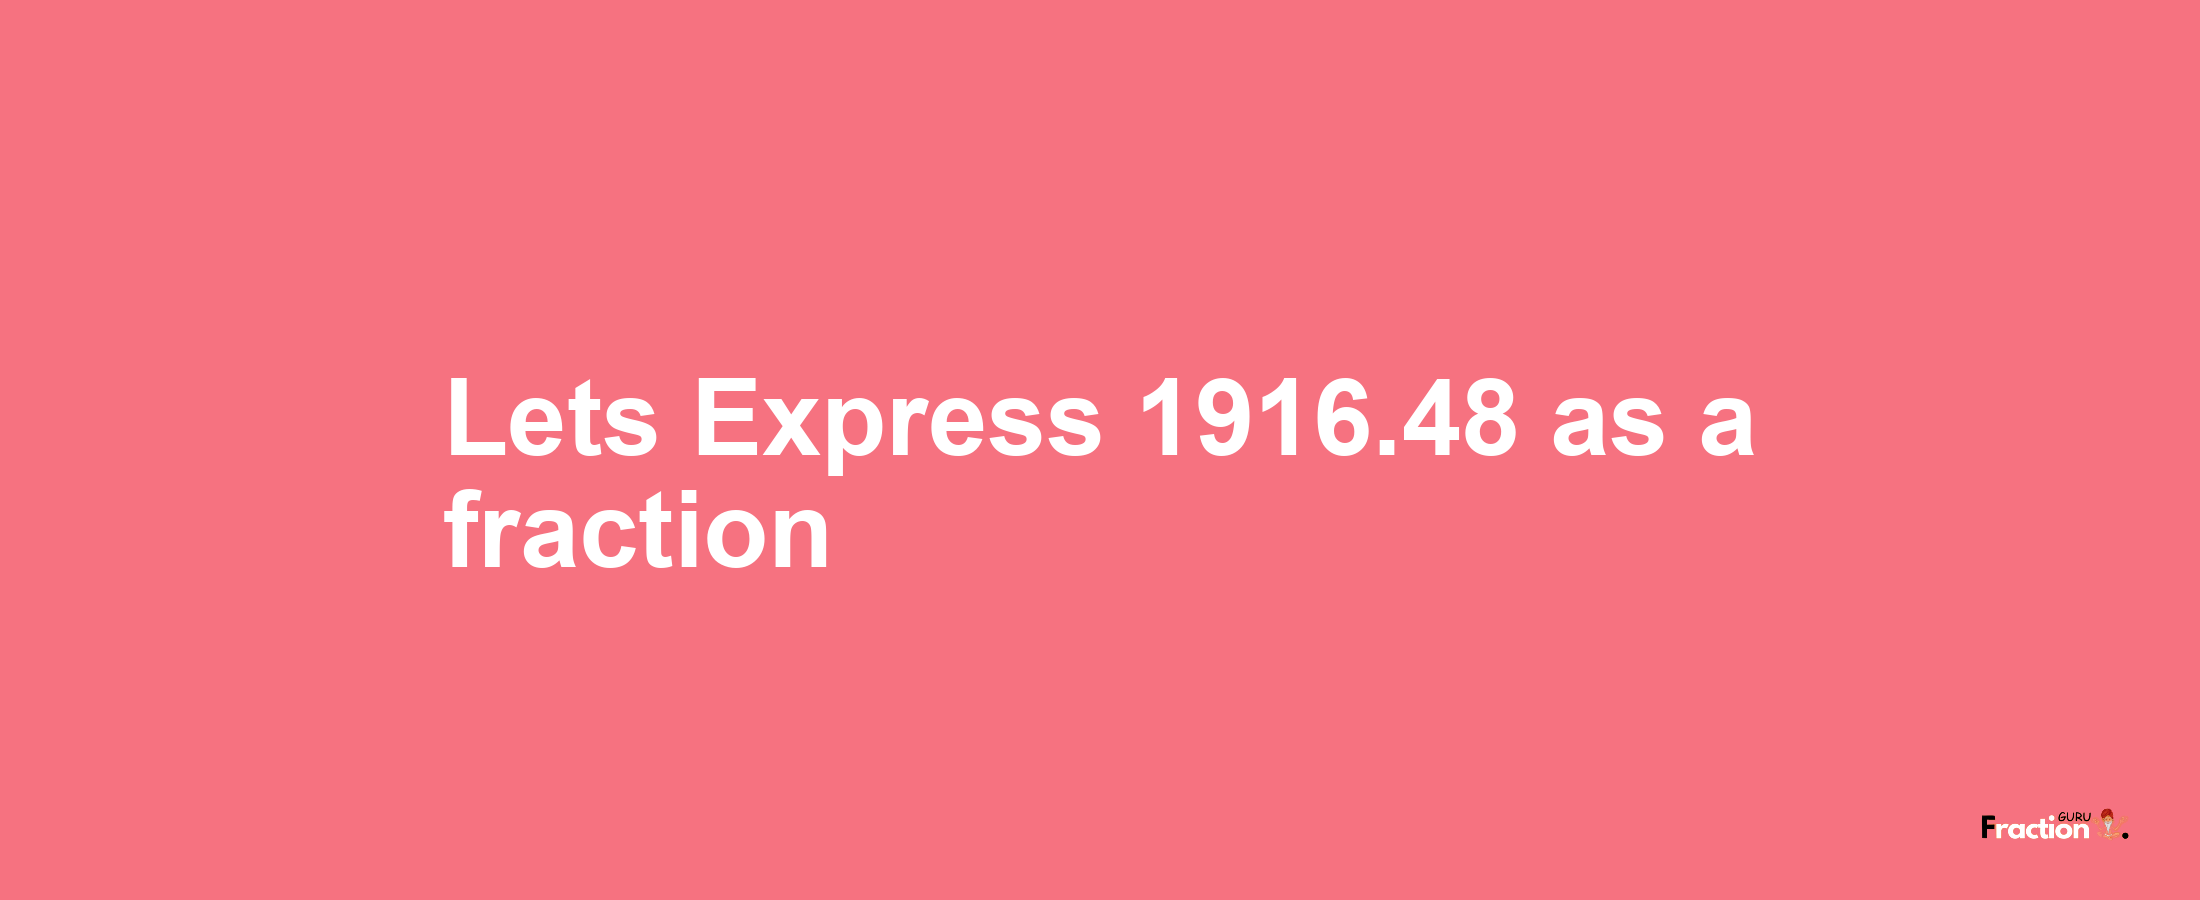 Lets Express 1916.48 as afraction